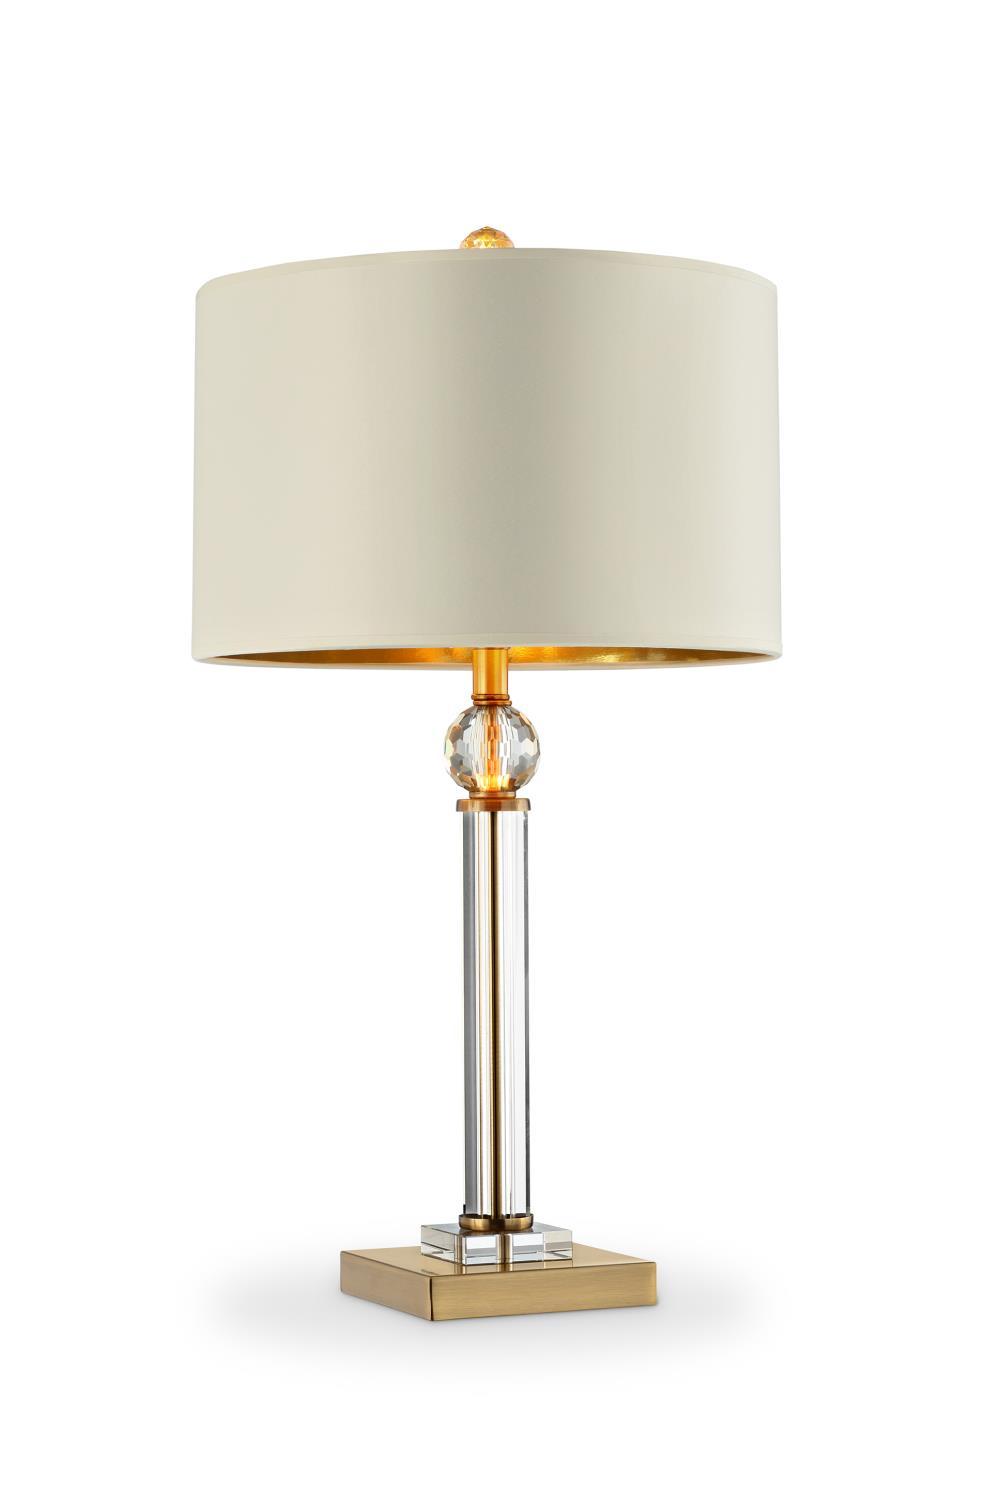 ORE International Perspicio Solid Crystal Gold Column Table Lamp ORE-5161T